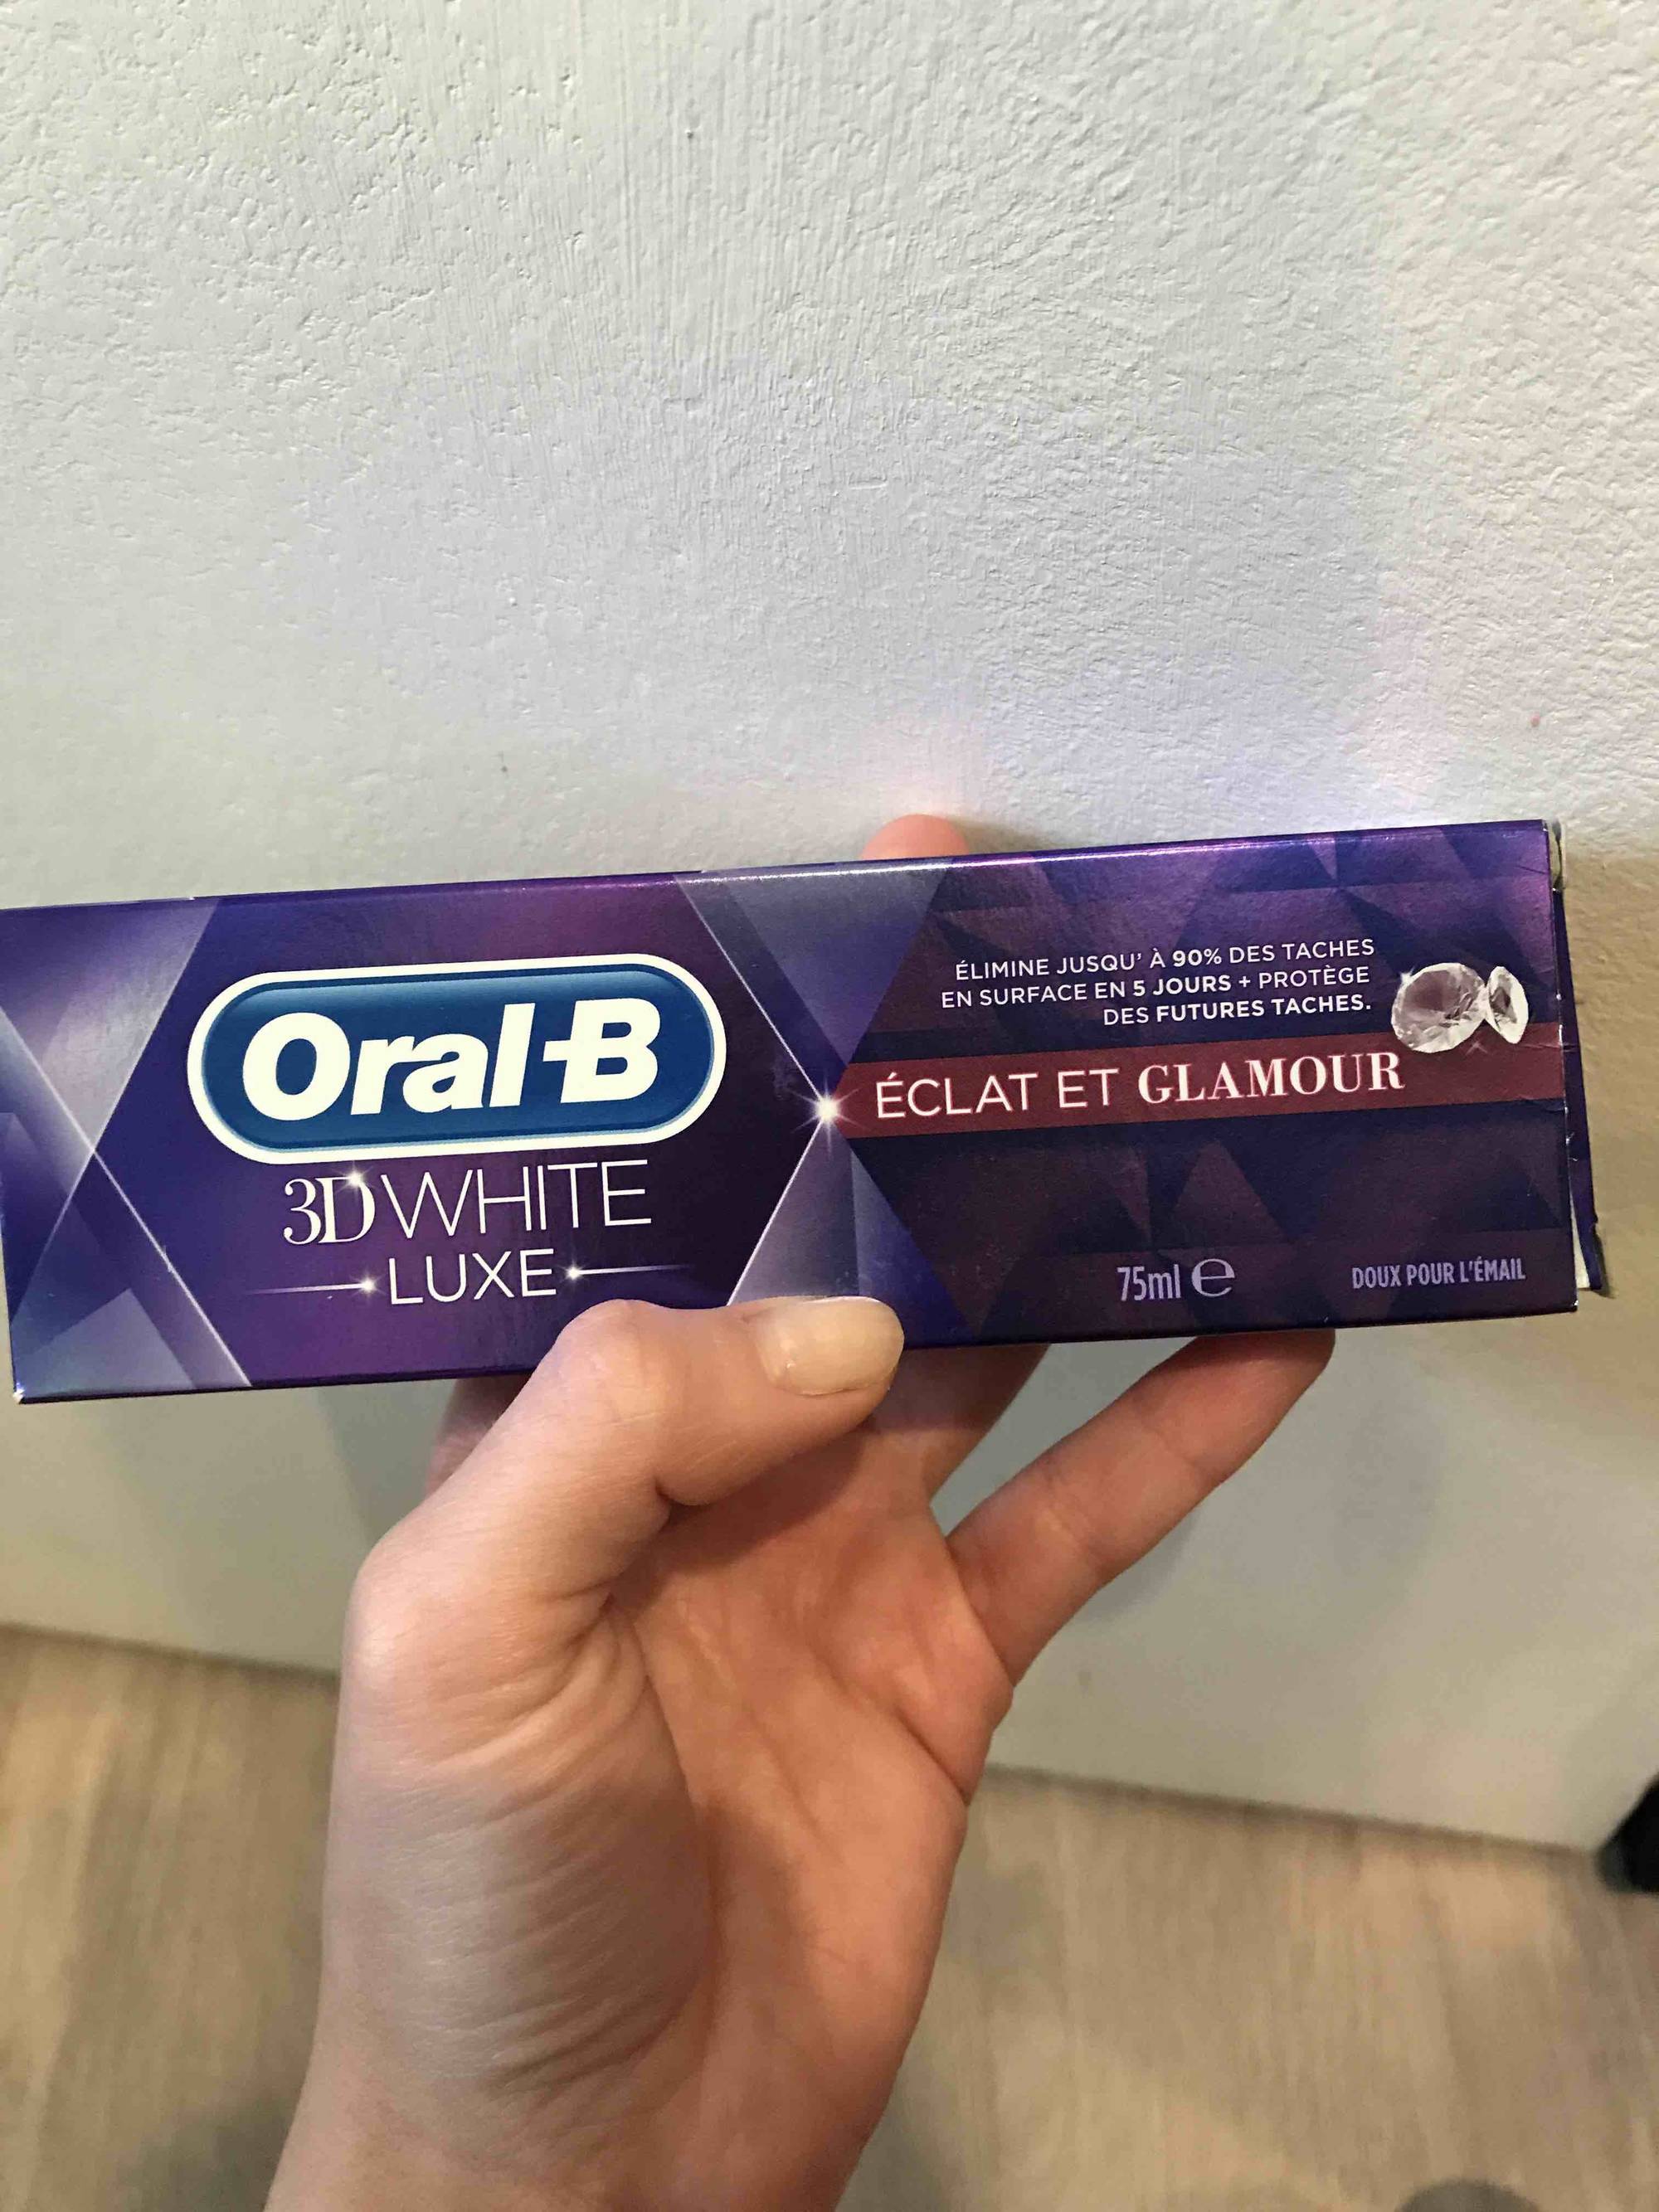 ORAL-B - Dentifrice 3D white luxe éclat et glamour